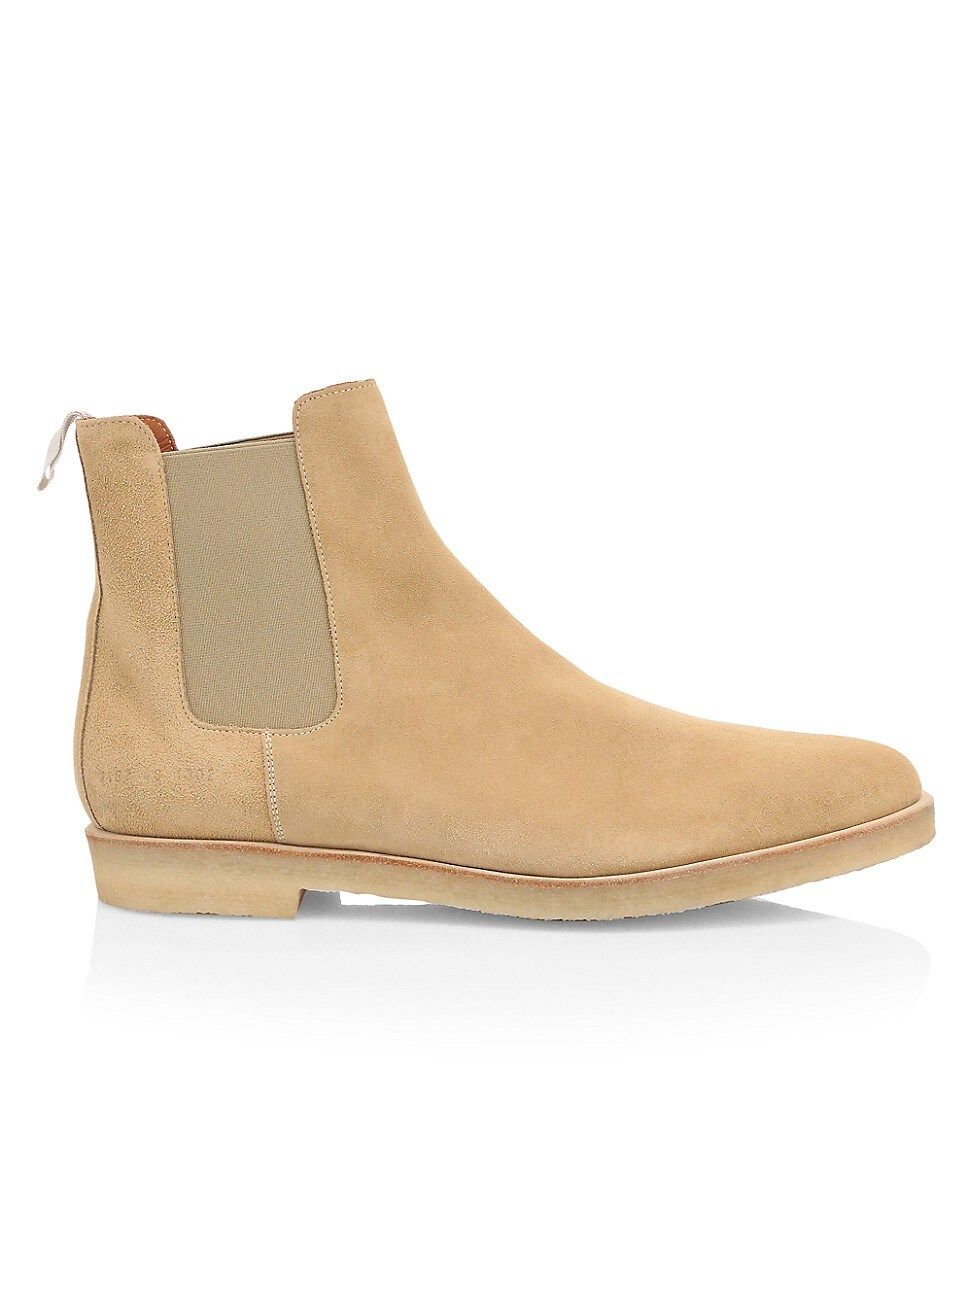 Common Projects Men's Suede Chelsea Boots - Tan - Size 11 | Saks Fifth Avenue